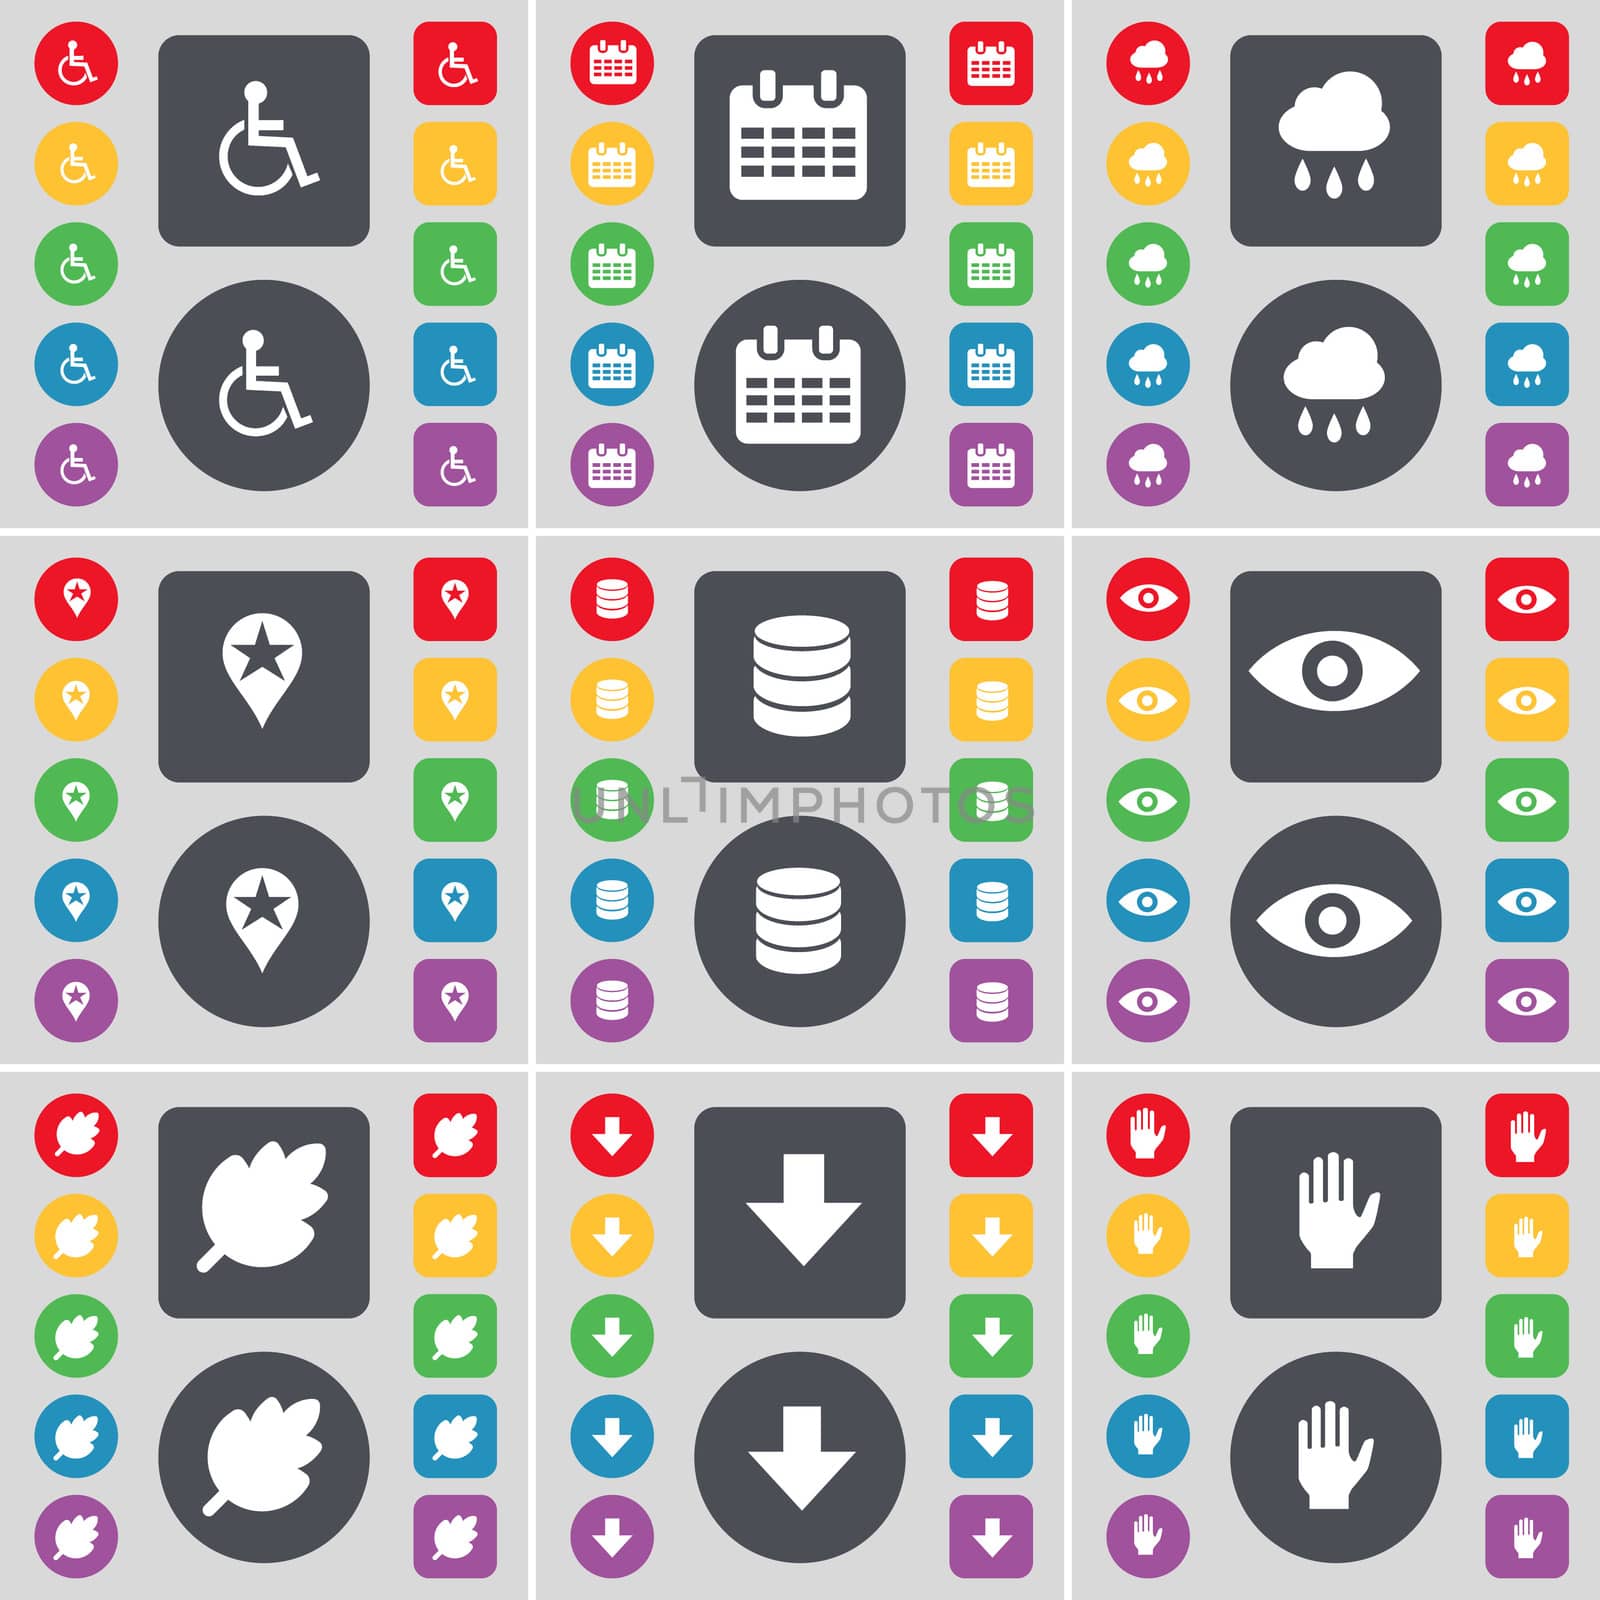 Disabled person, Calendar, Cloud, Checkpoint, Database, Vision, Leaf, Arrow down, Hand icon symbol. A large set of flat, colored buttons for your design.  by serhii_lohvyniuk